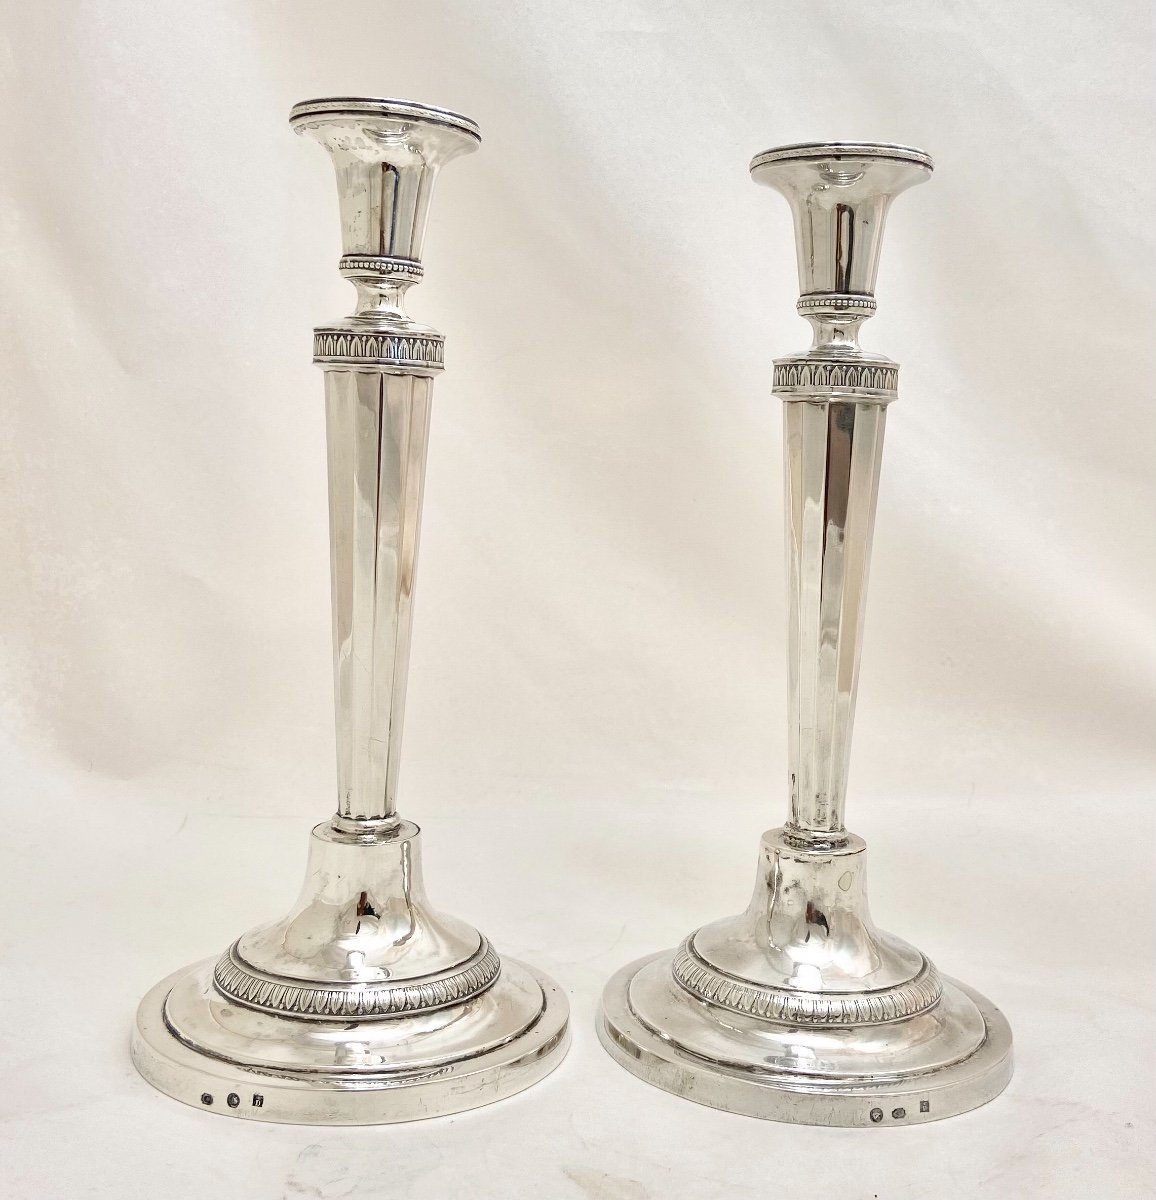 Charles X Candlesticks, Mons 1814-1831, Sterling Silver, Pierre Deshorgnies